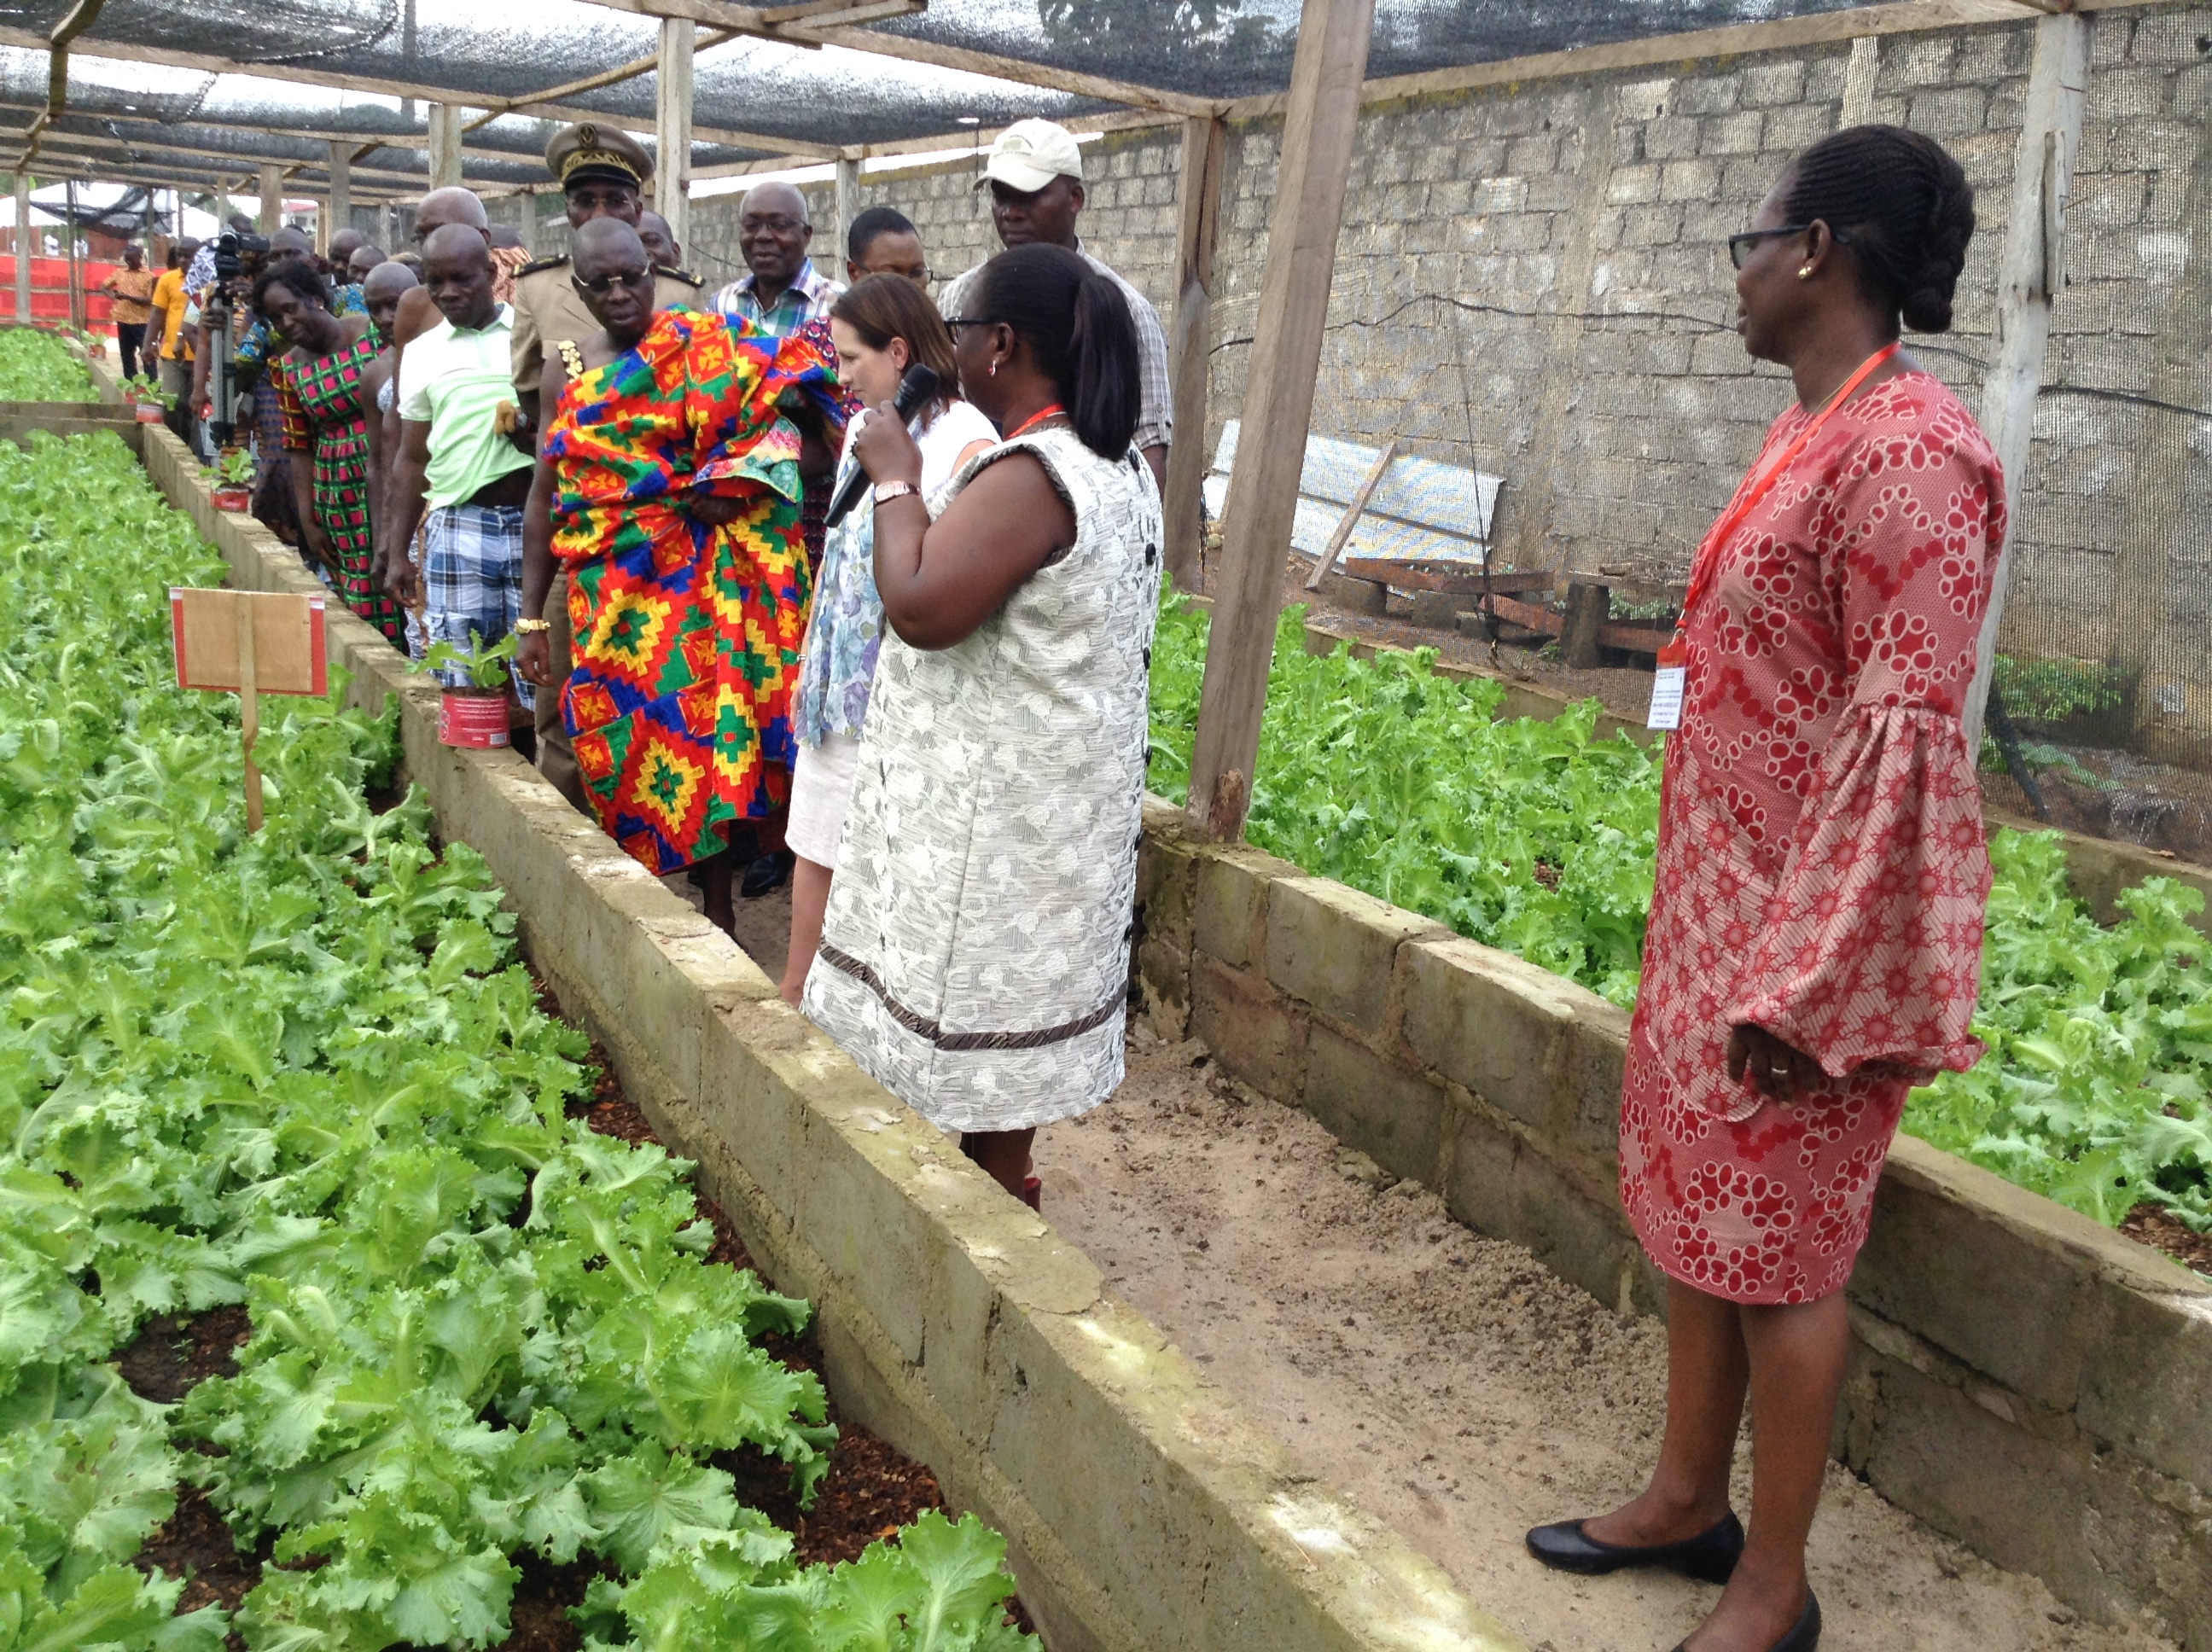 Ambassador Shouldice visits a new plot of hydroponic farming land with Michelle Morokro from La Pierre Angulaire in Côte d’Ivoire. Credit: Global Affairs Canada